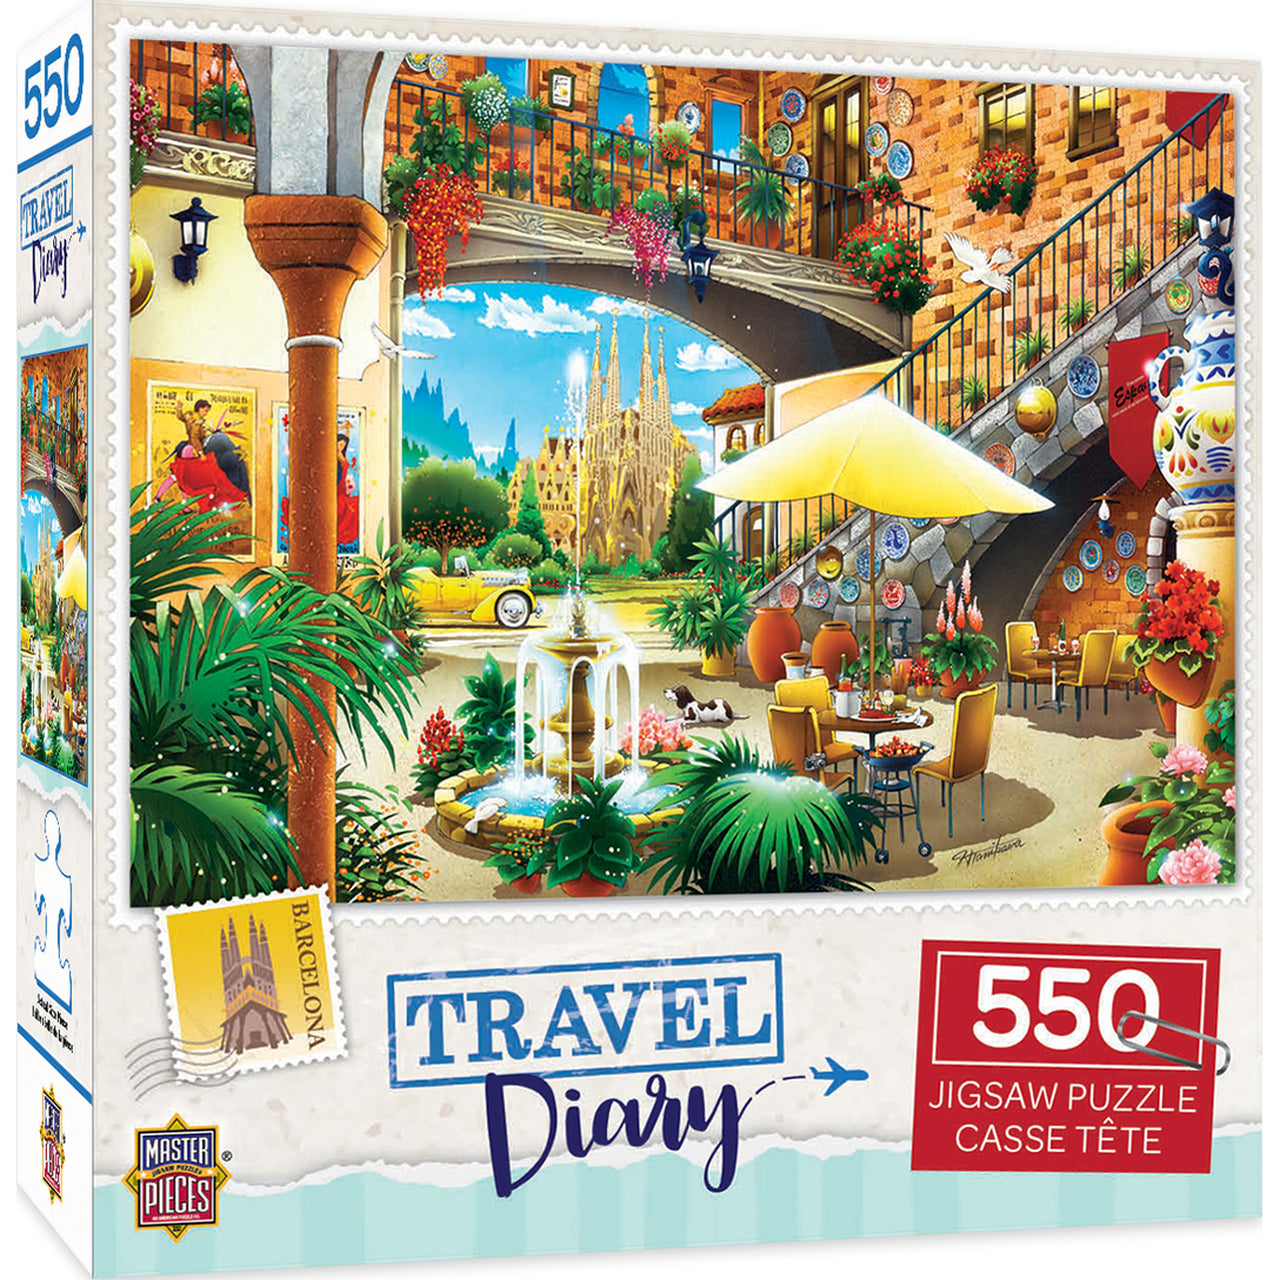 Travel Diary Barcelona- 550 Piece Jigsaw Puzzle by Masterpieces